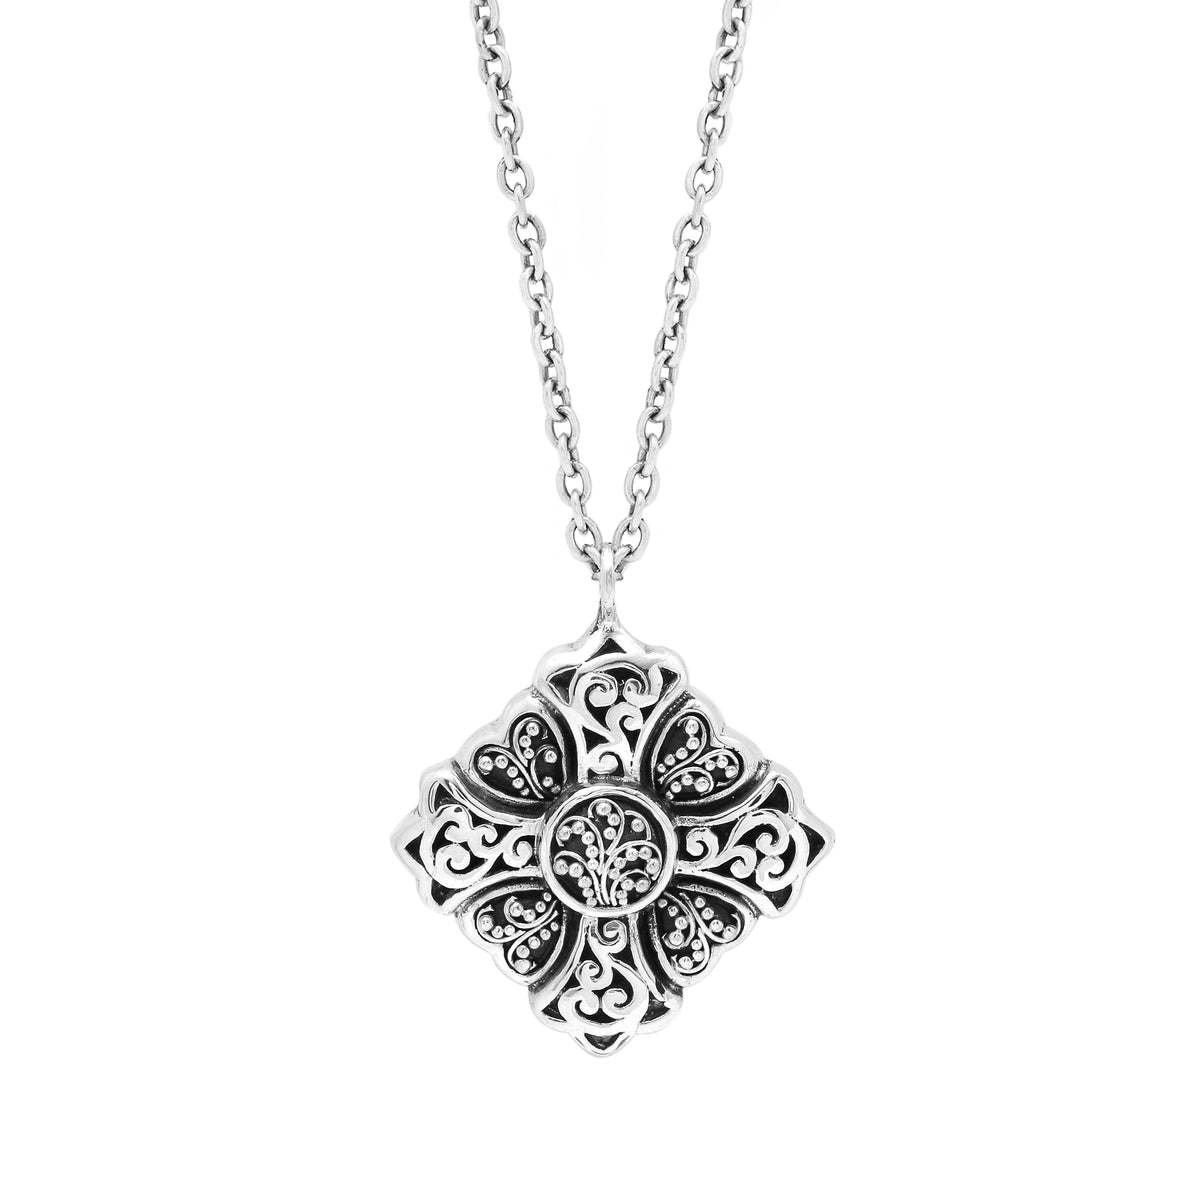 Classic Signature Scroll with Small Round Granulated Centre Alhambra Pendant Necklace - Lois Hill Jewelry